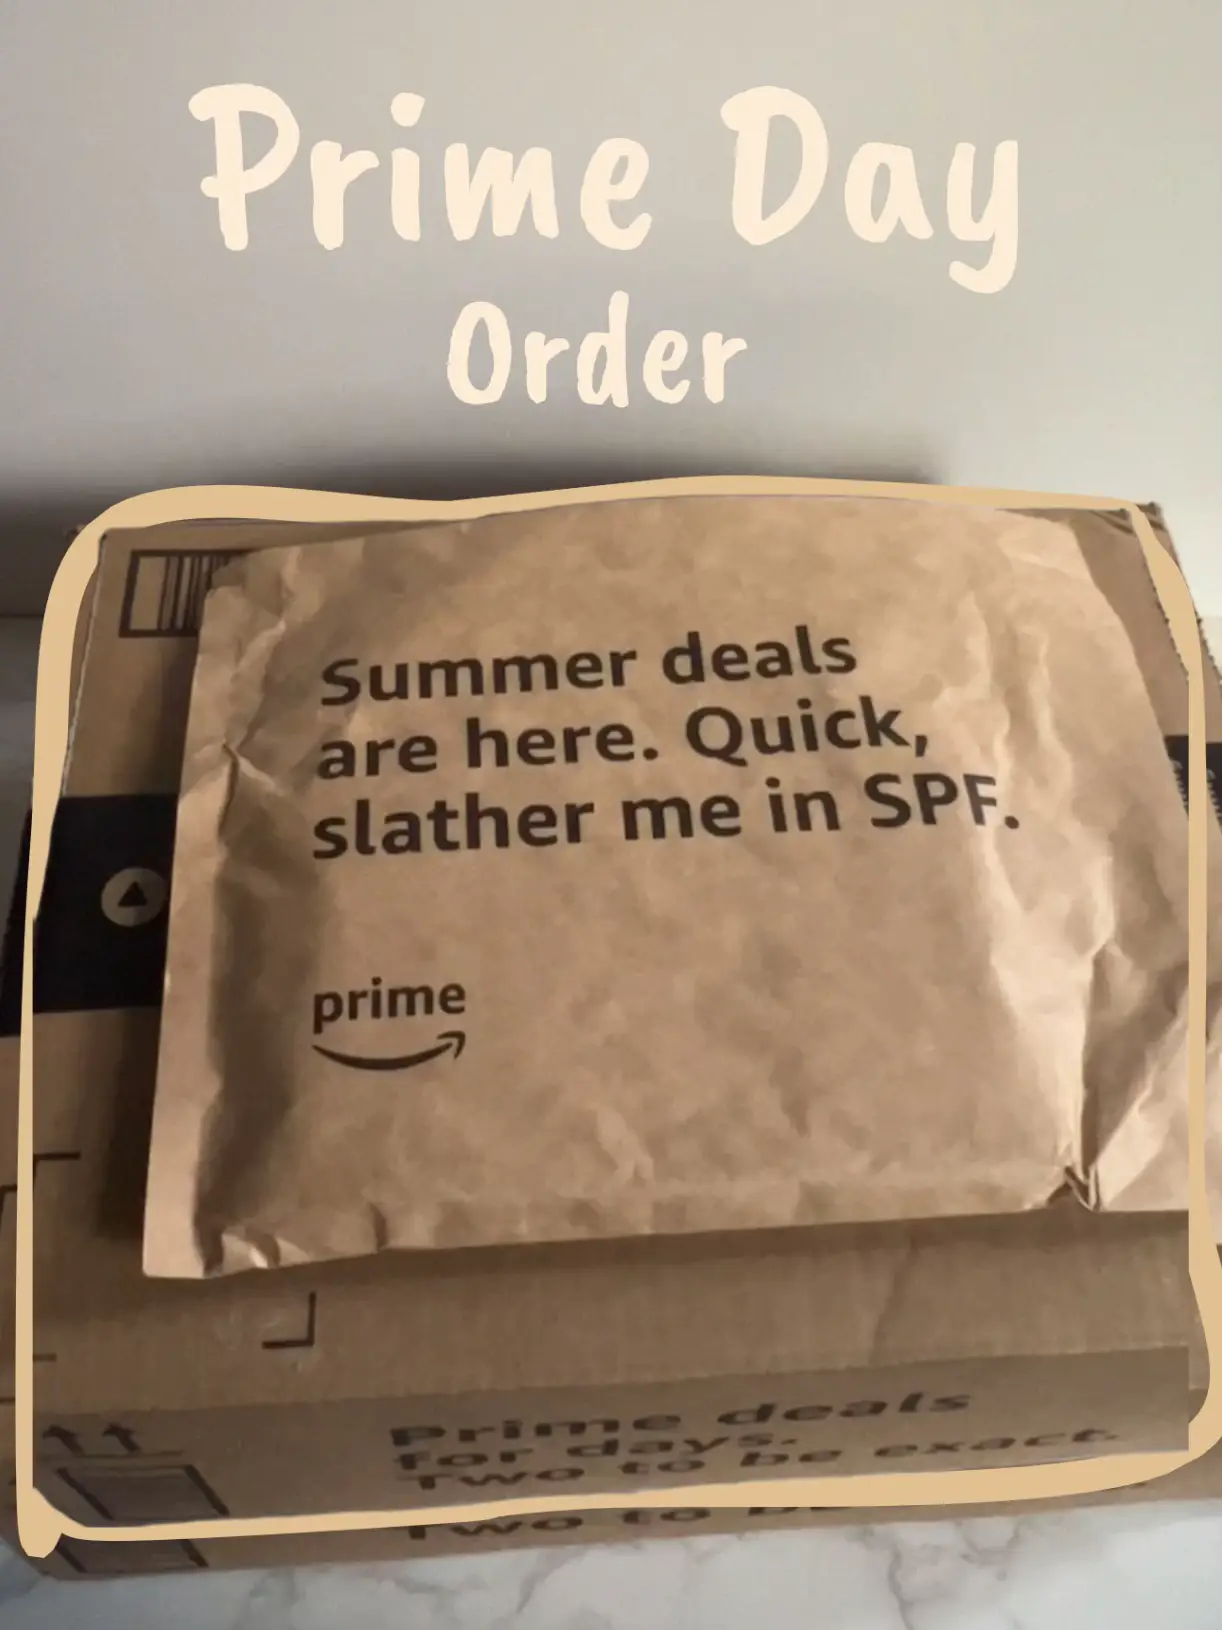 I'm sharing #primedayfinds all day today! Here's a great